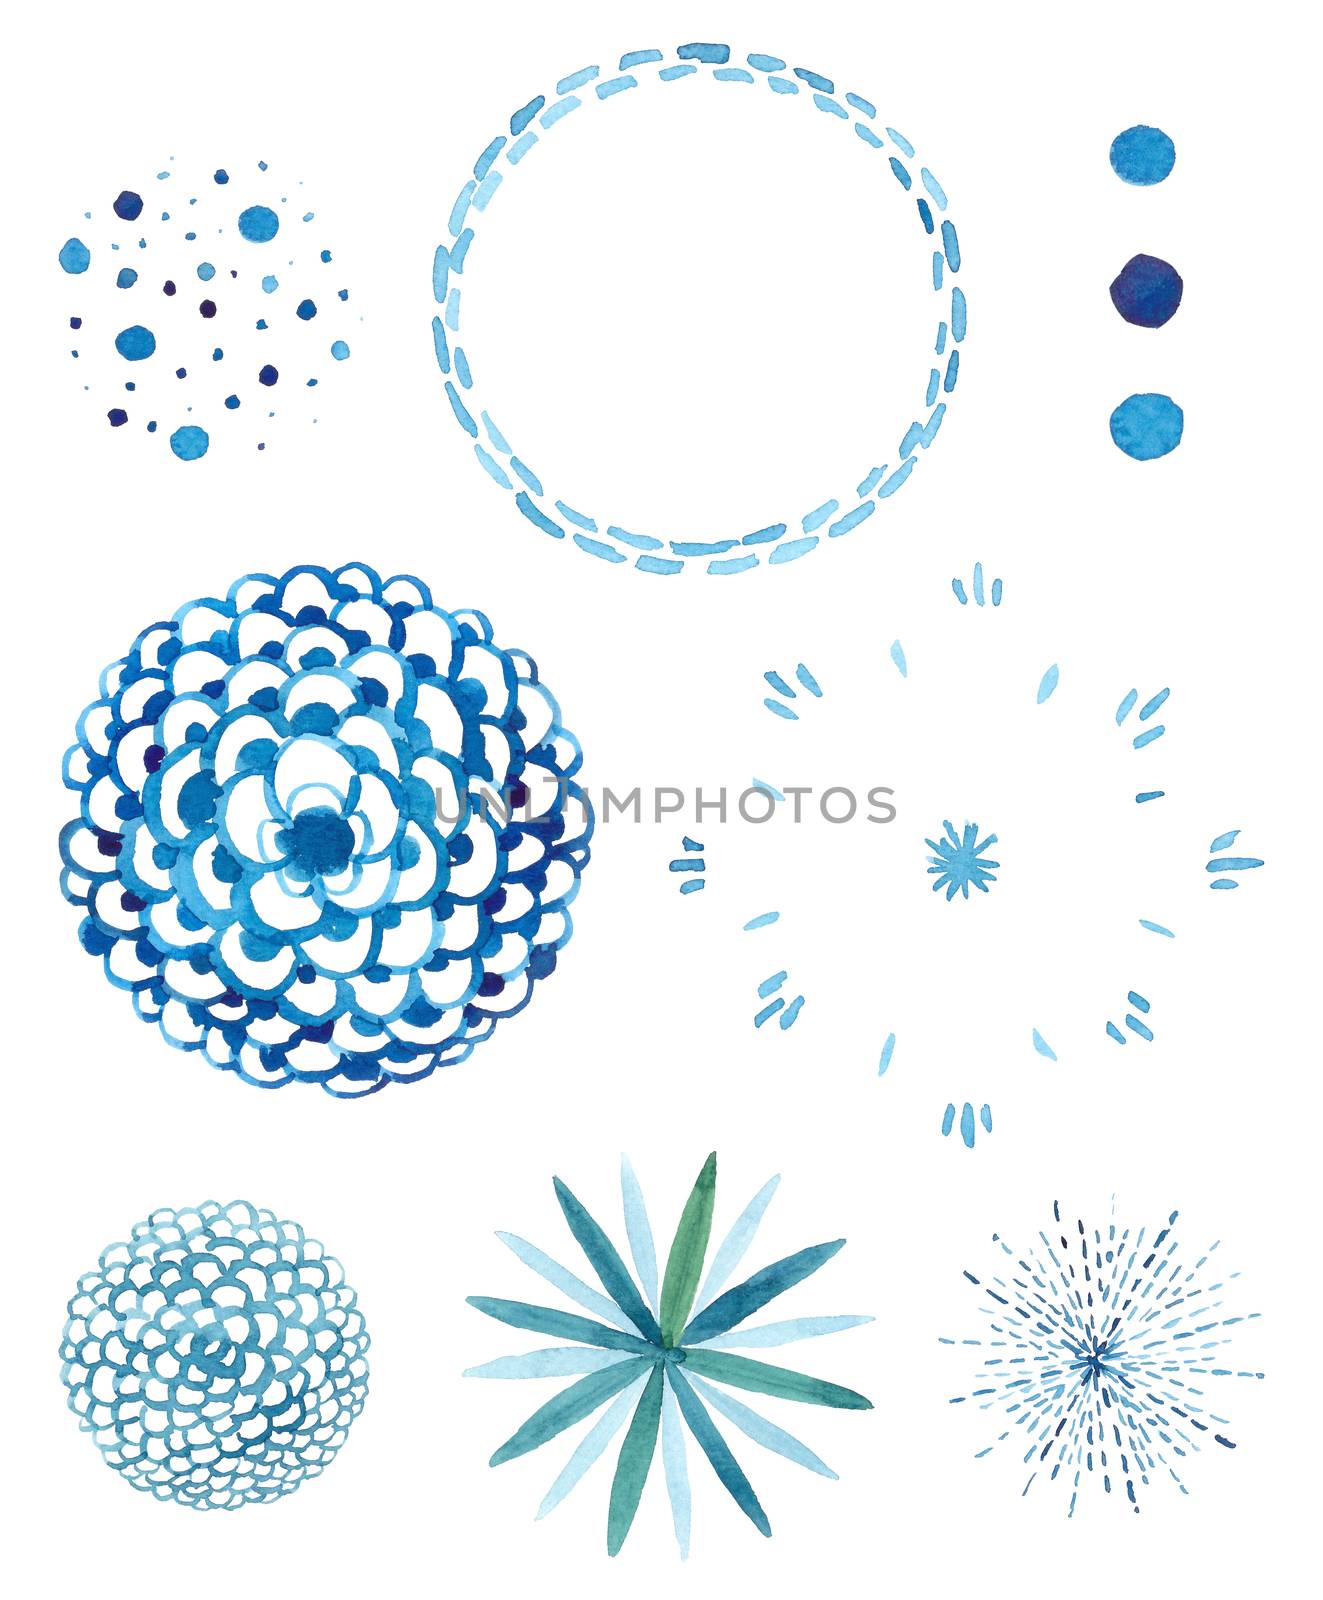 Creative illustration of geometric hand drawn sun beams and flowers isolated on background. Art design linear sunlight waves, shining lines ray stars. Abstract concept graphic round or circle form element. by Ungamrung